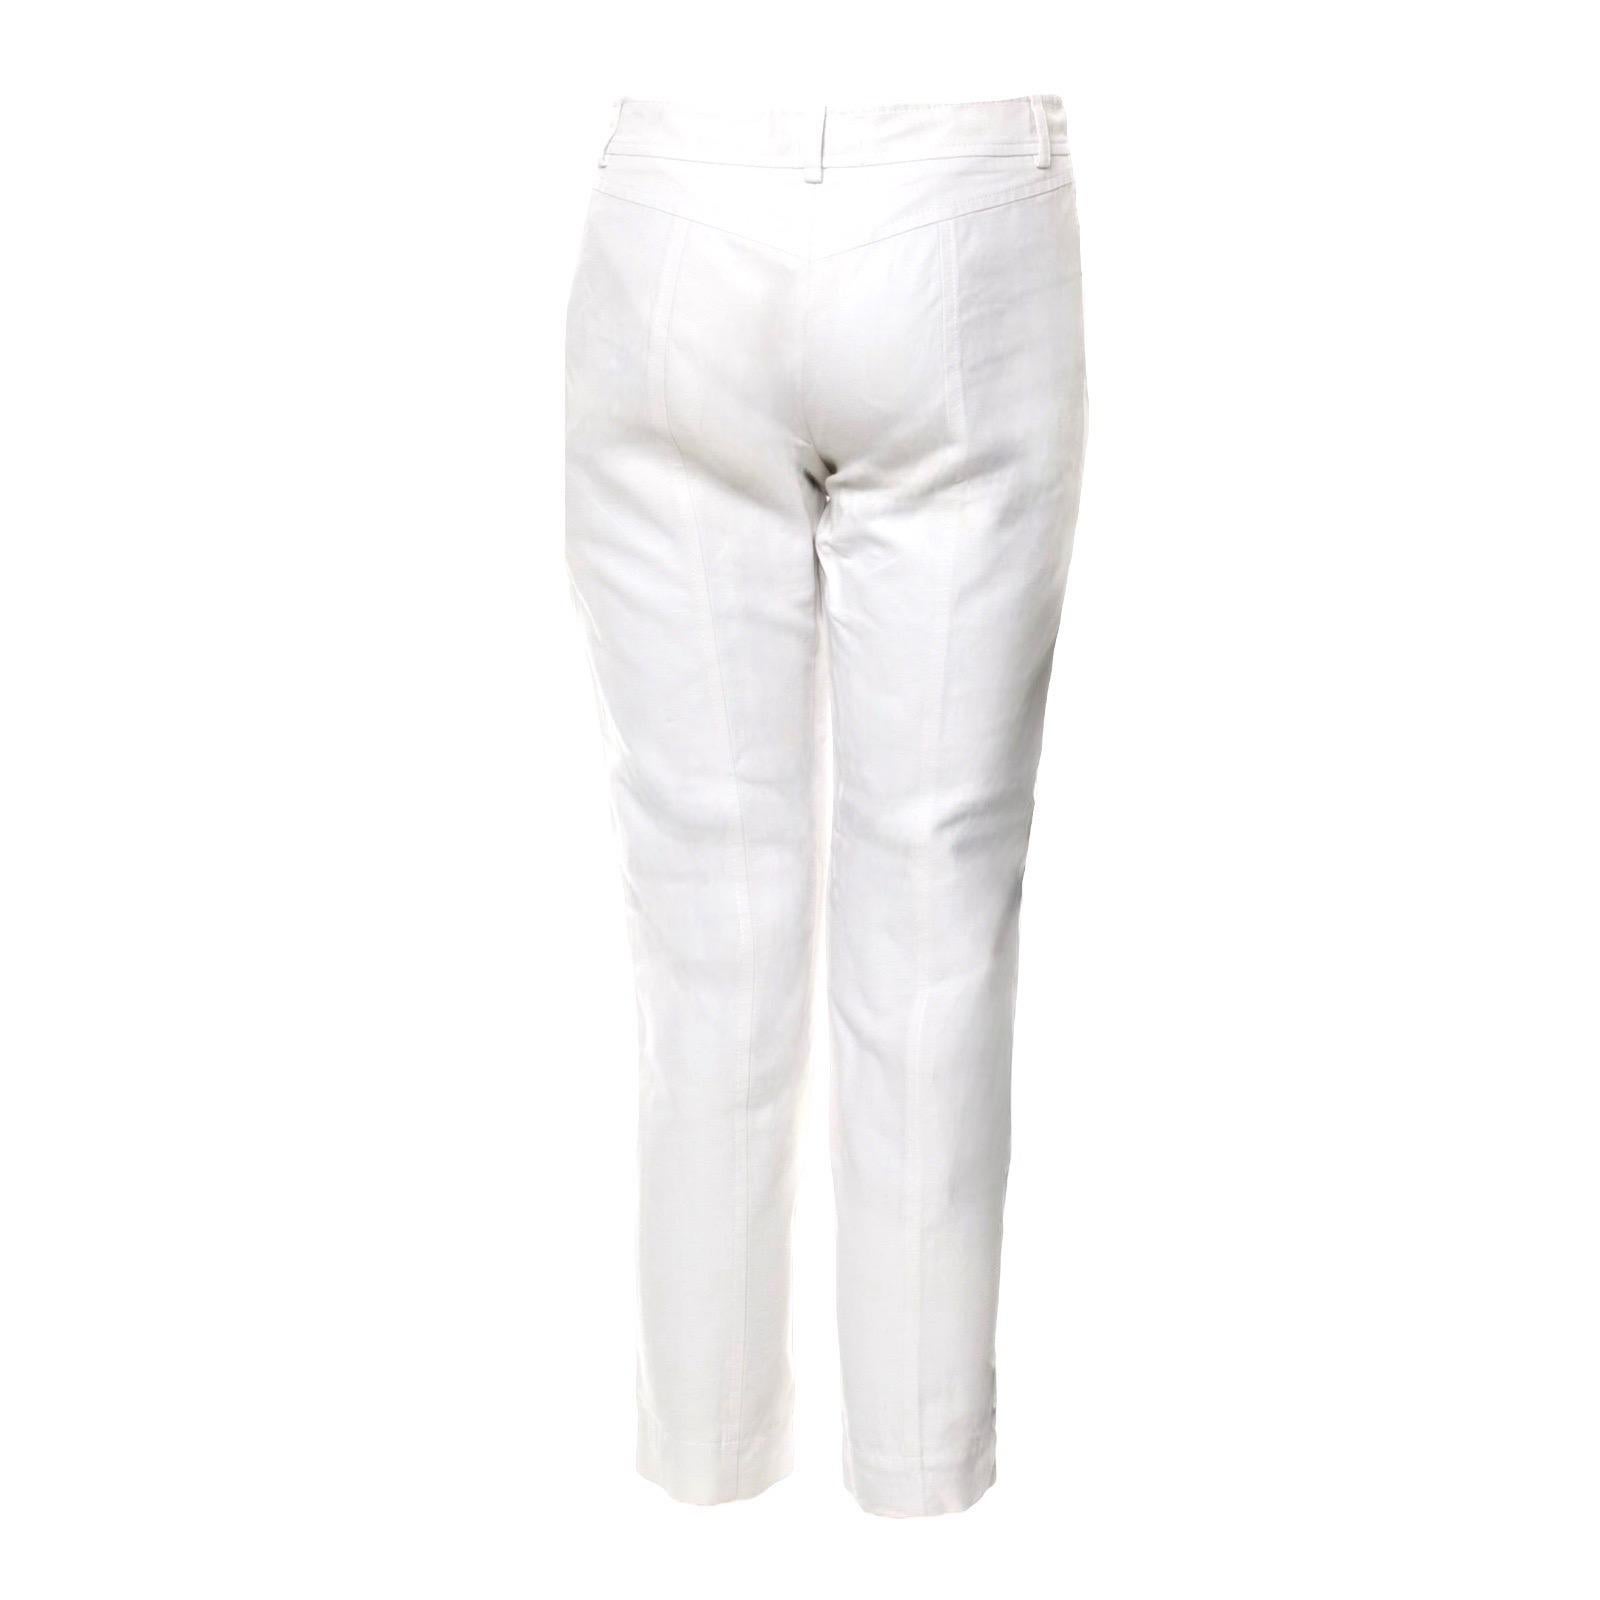 Wonderful white skinny pants by Emilio Pucci.

Details:

Two side zip pockets
Light-gold hardware trimmings engraved with the famous PUCCI crest
Concealed hook, button and zip fastening at front
Mid-weight fabric
Dry clean
Made in Italy
Comfortable